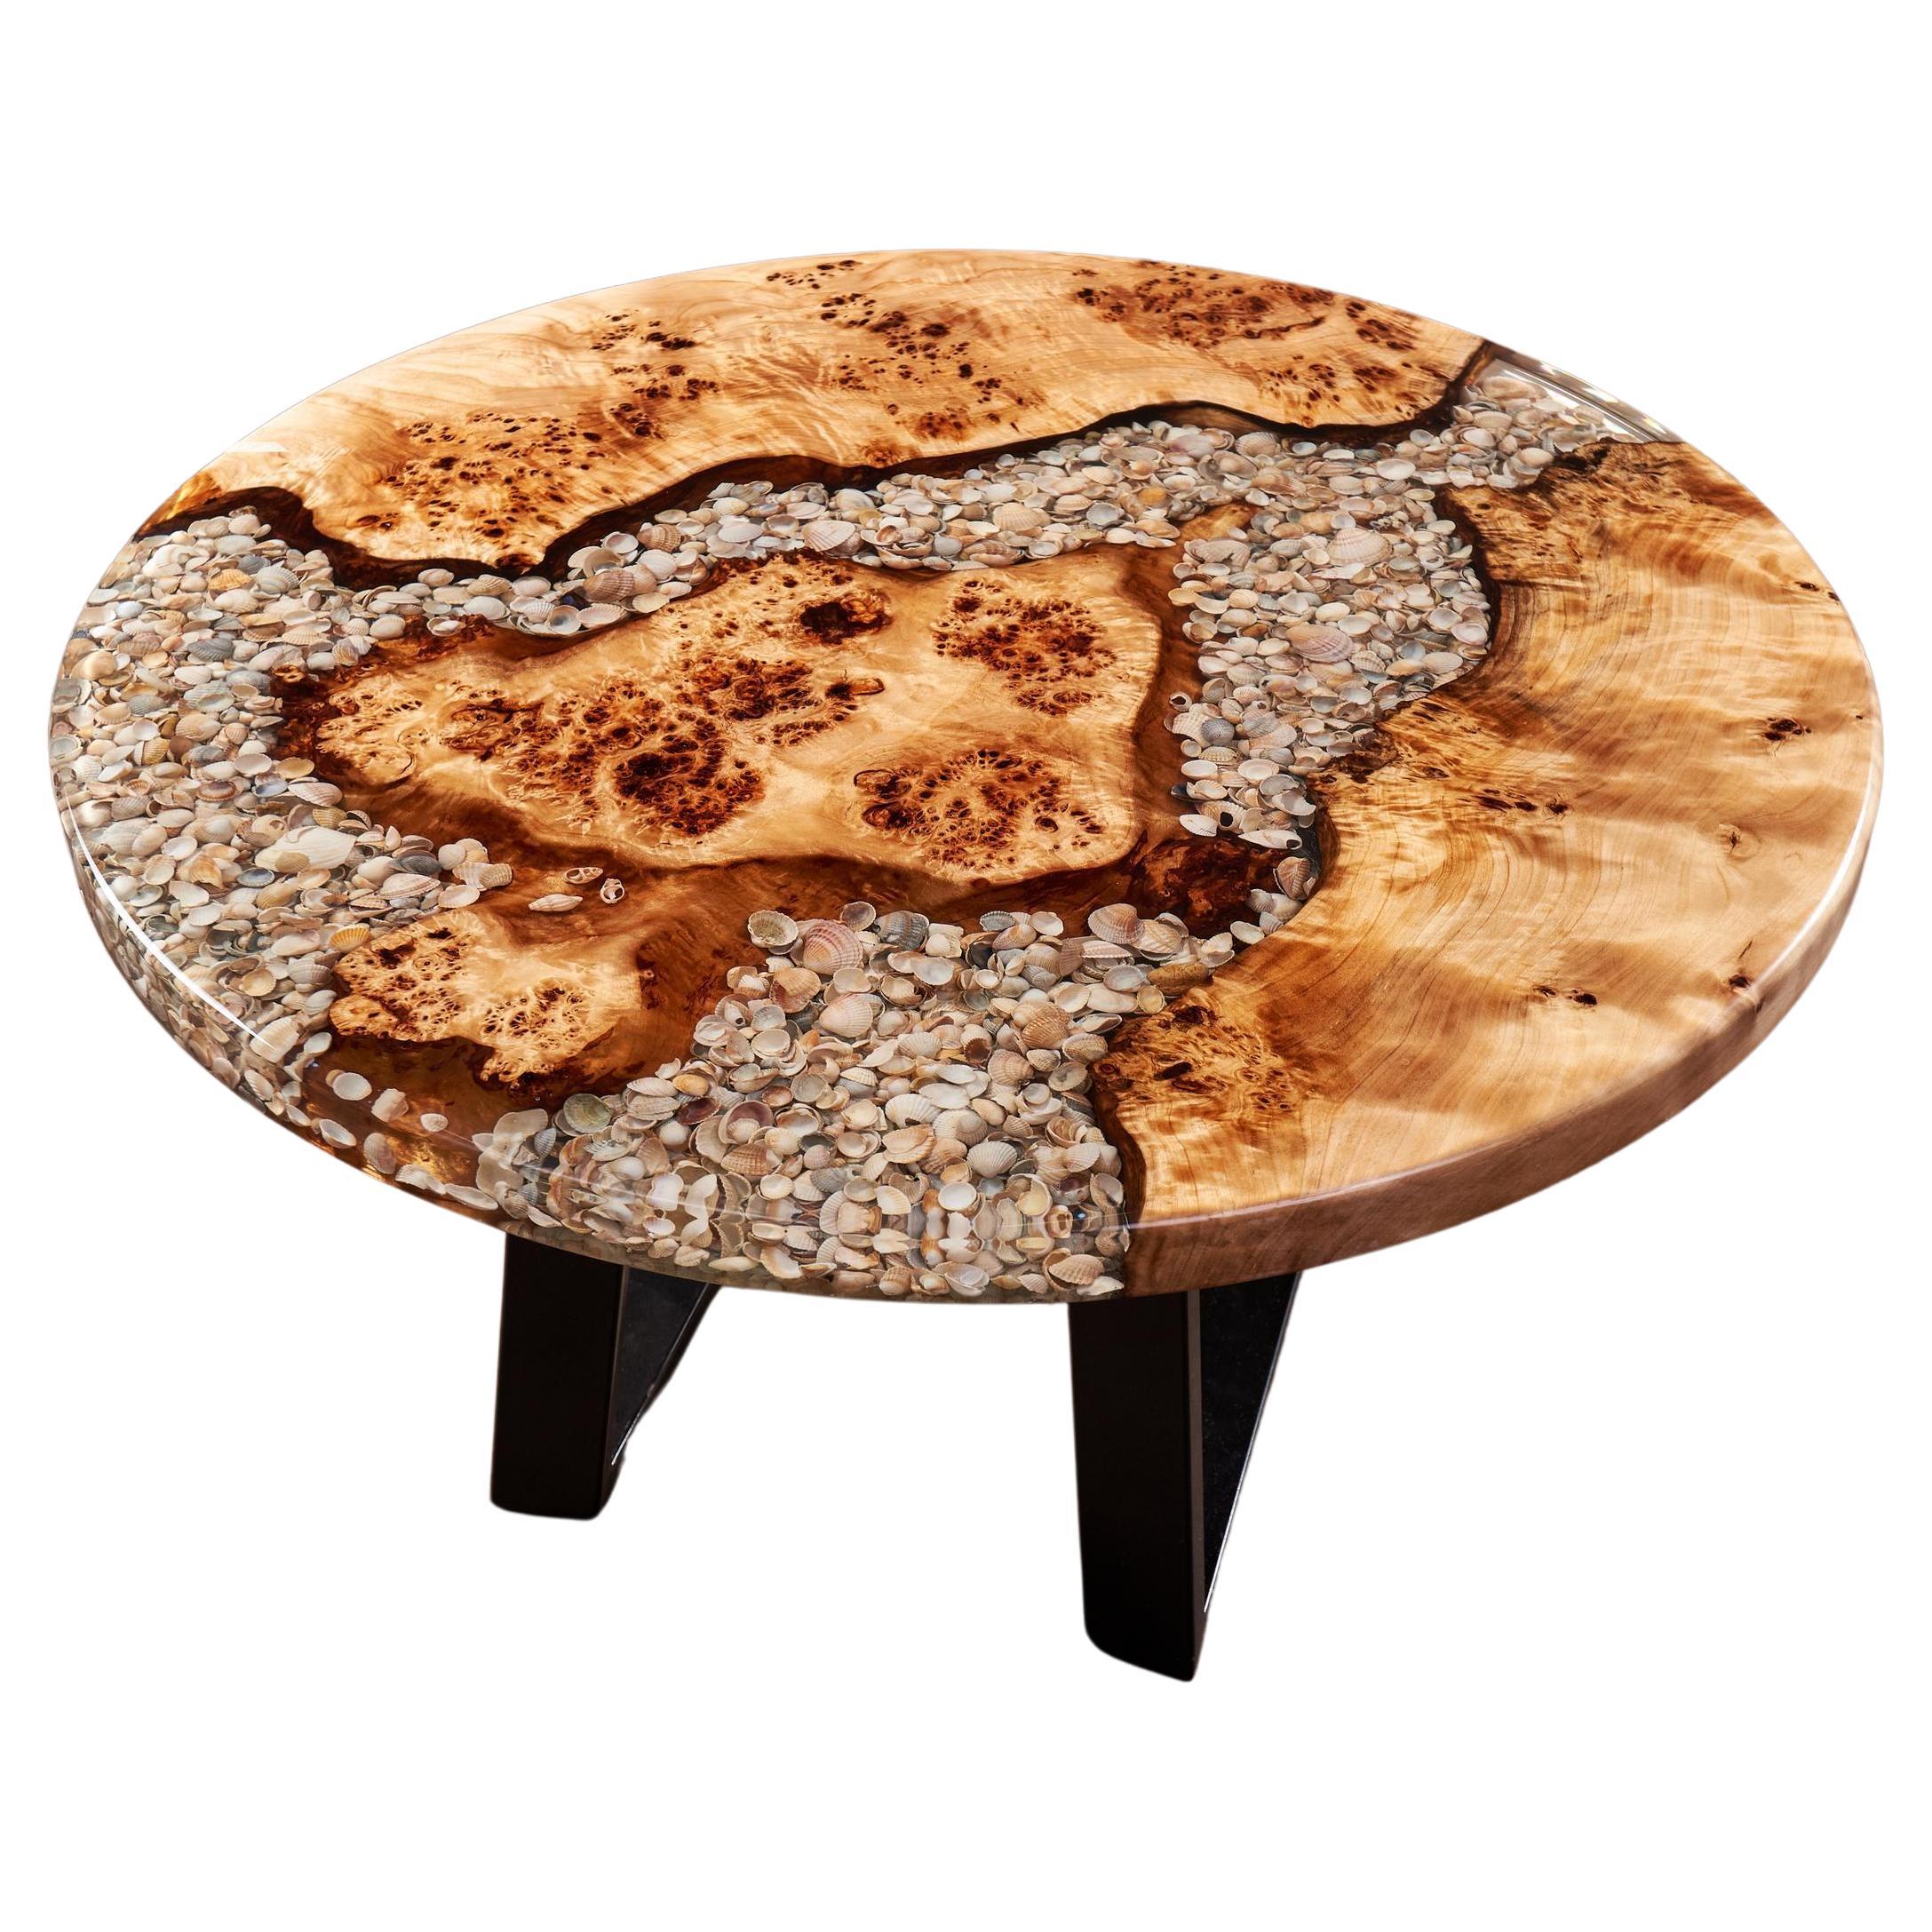 Burl Wood Coffee Table Round Wooden Resin Table Contemporary Modern Coffee Table